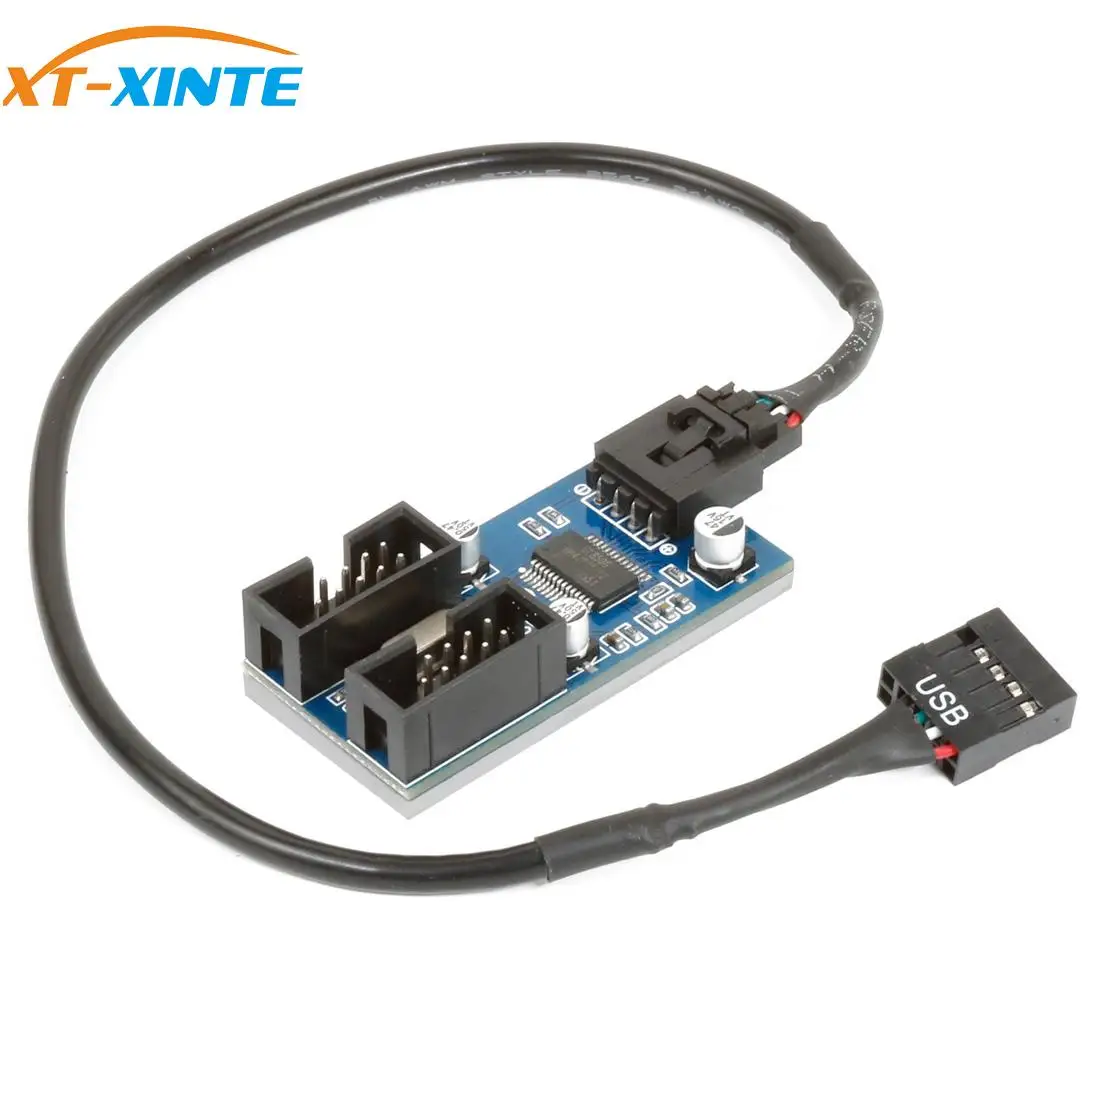 XT-XINTE 9pin USB header Male 1 to 2/4 Female Extension Cable Card Desktop 9-Pin USB HUB USB 2.0 9 pin Connector Port Multiplier